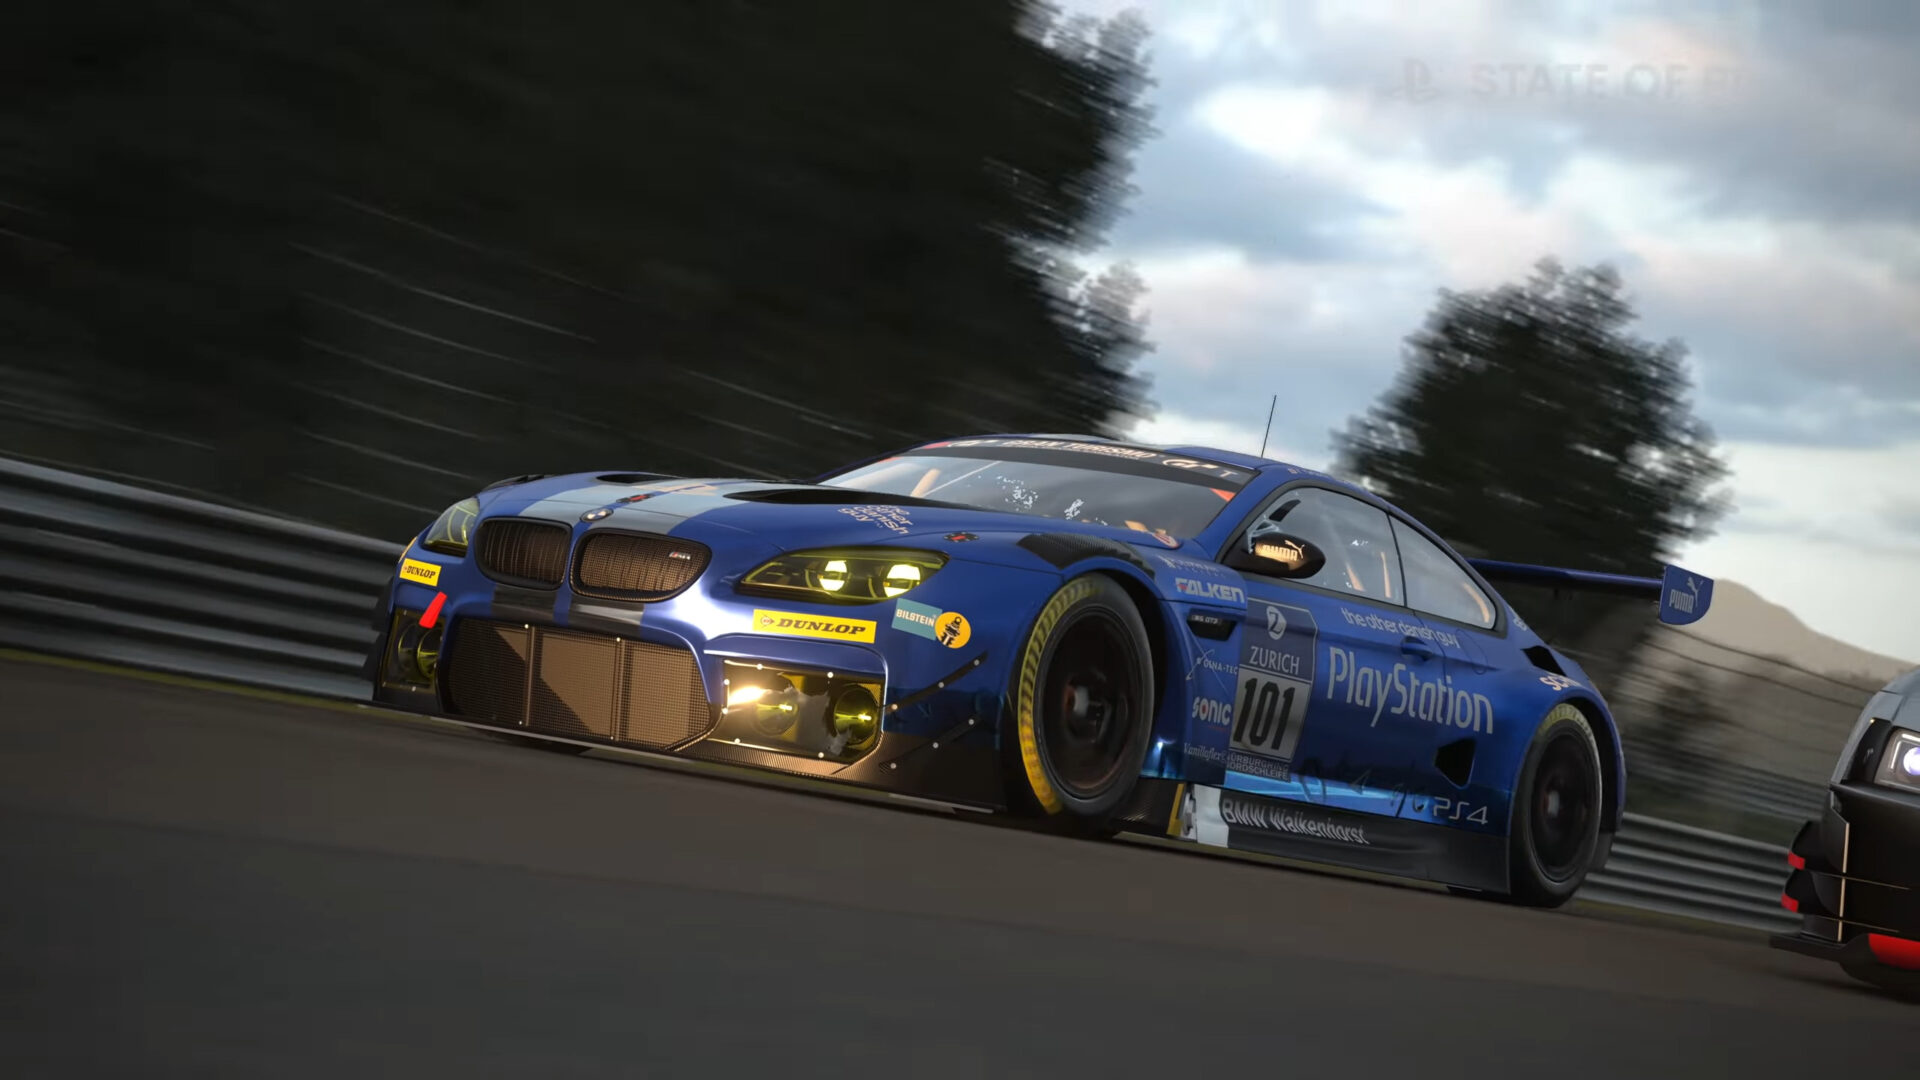 Sony Leaves Virag's Trademark Suit over Gran Turismo in the Dust